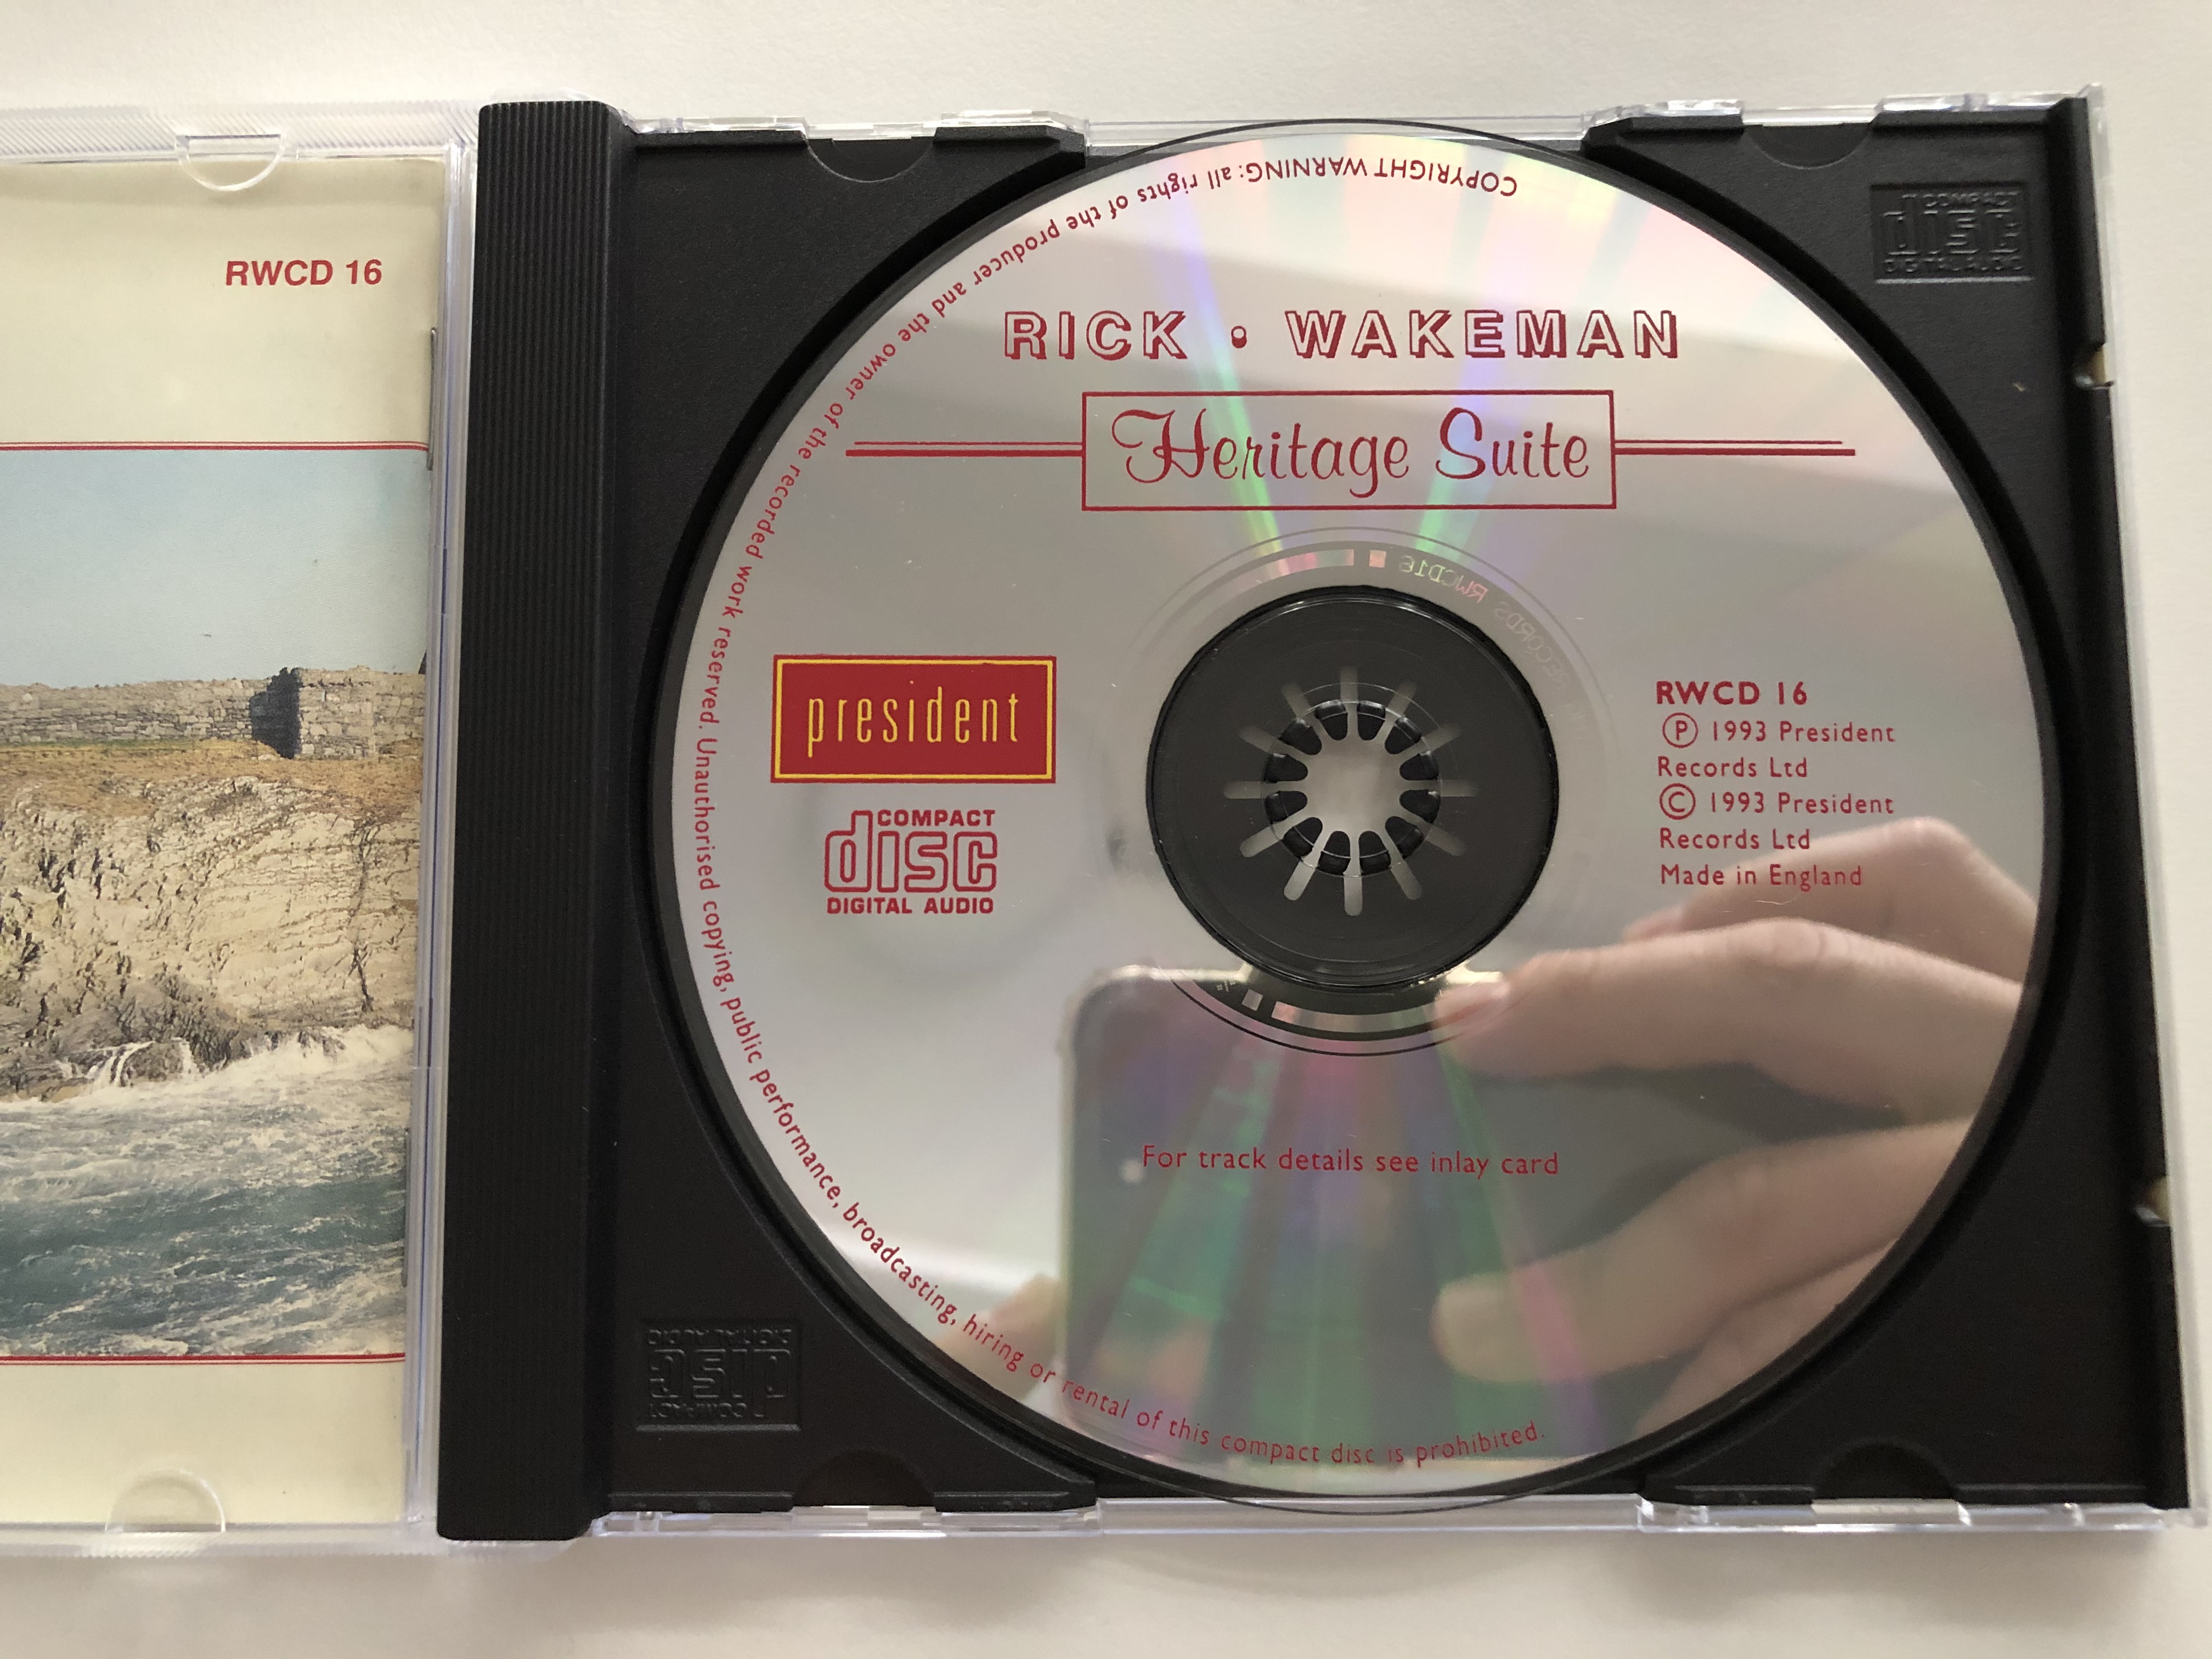 rick-wakeman-heritage-suite-a-tribute-to-the-unique-heritage-of-the-isle-of-man-president-records-audio-cd-1993-rwcd-16-3-.jpg